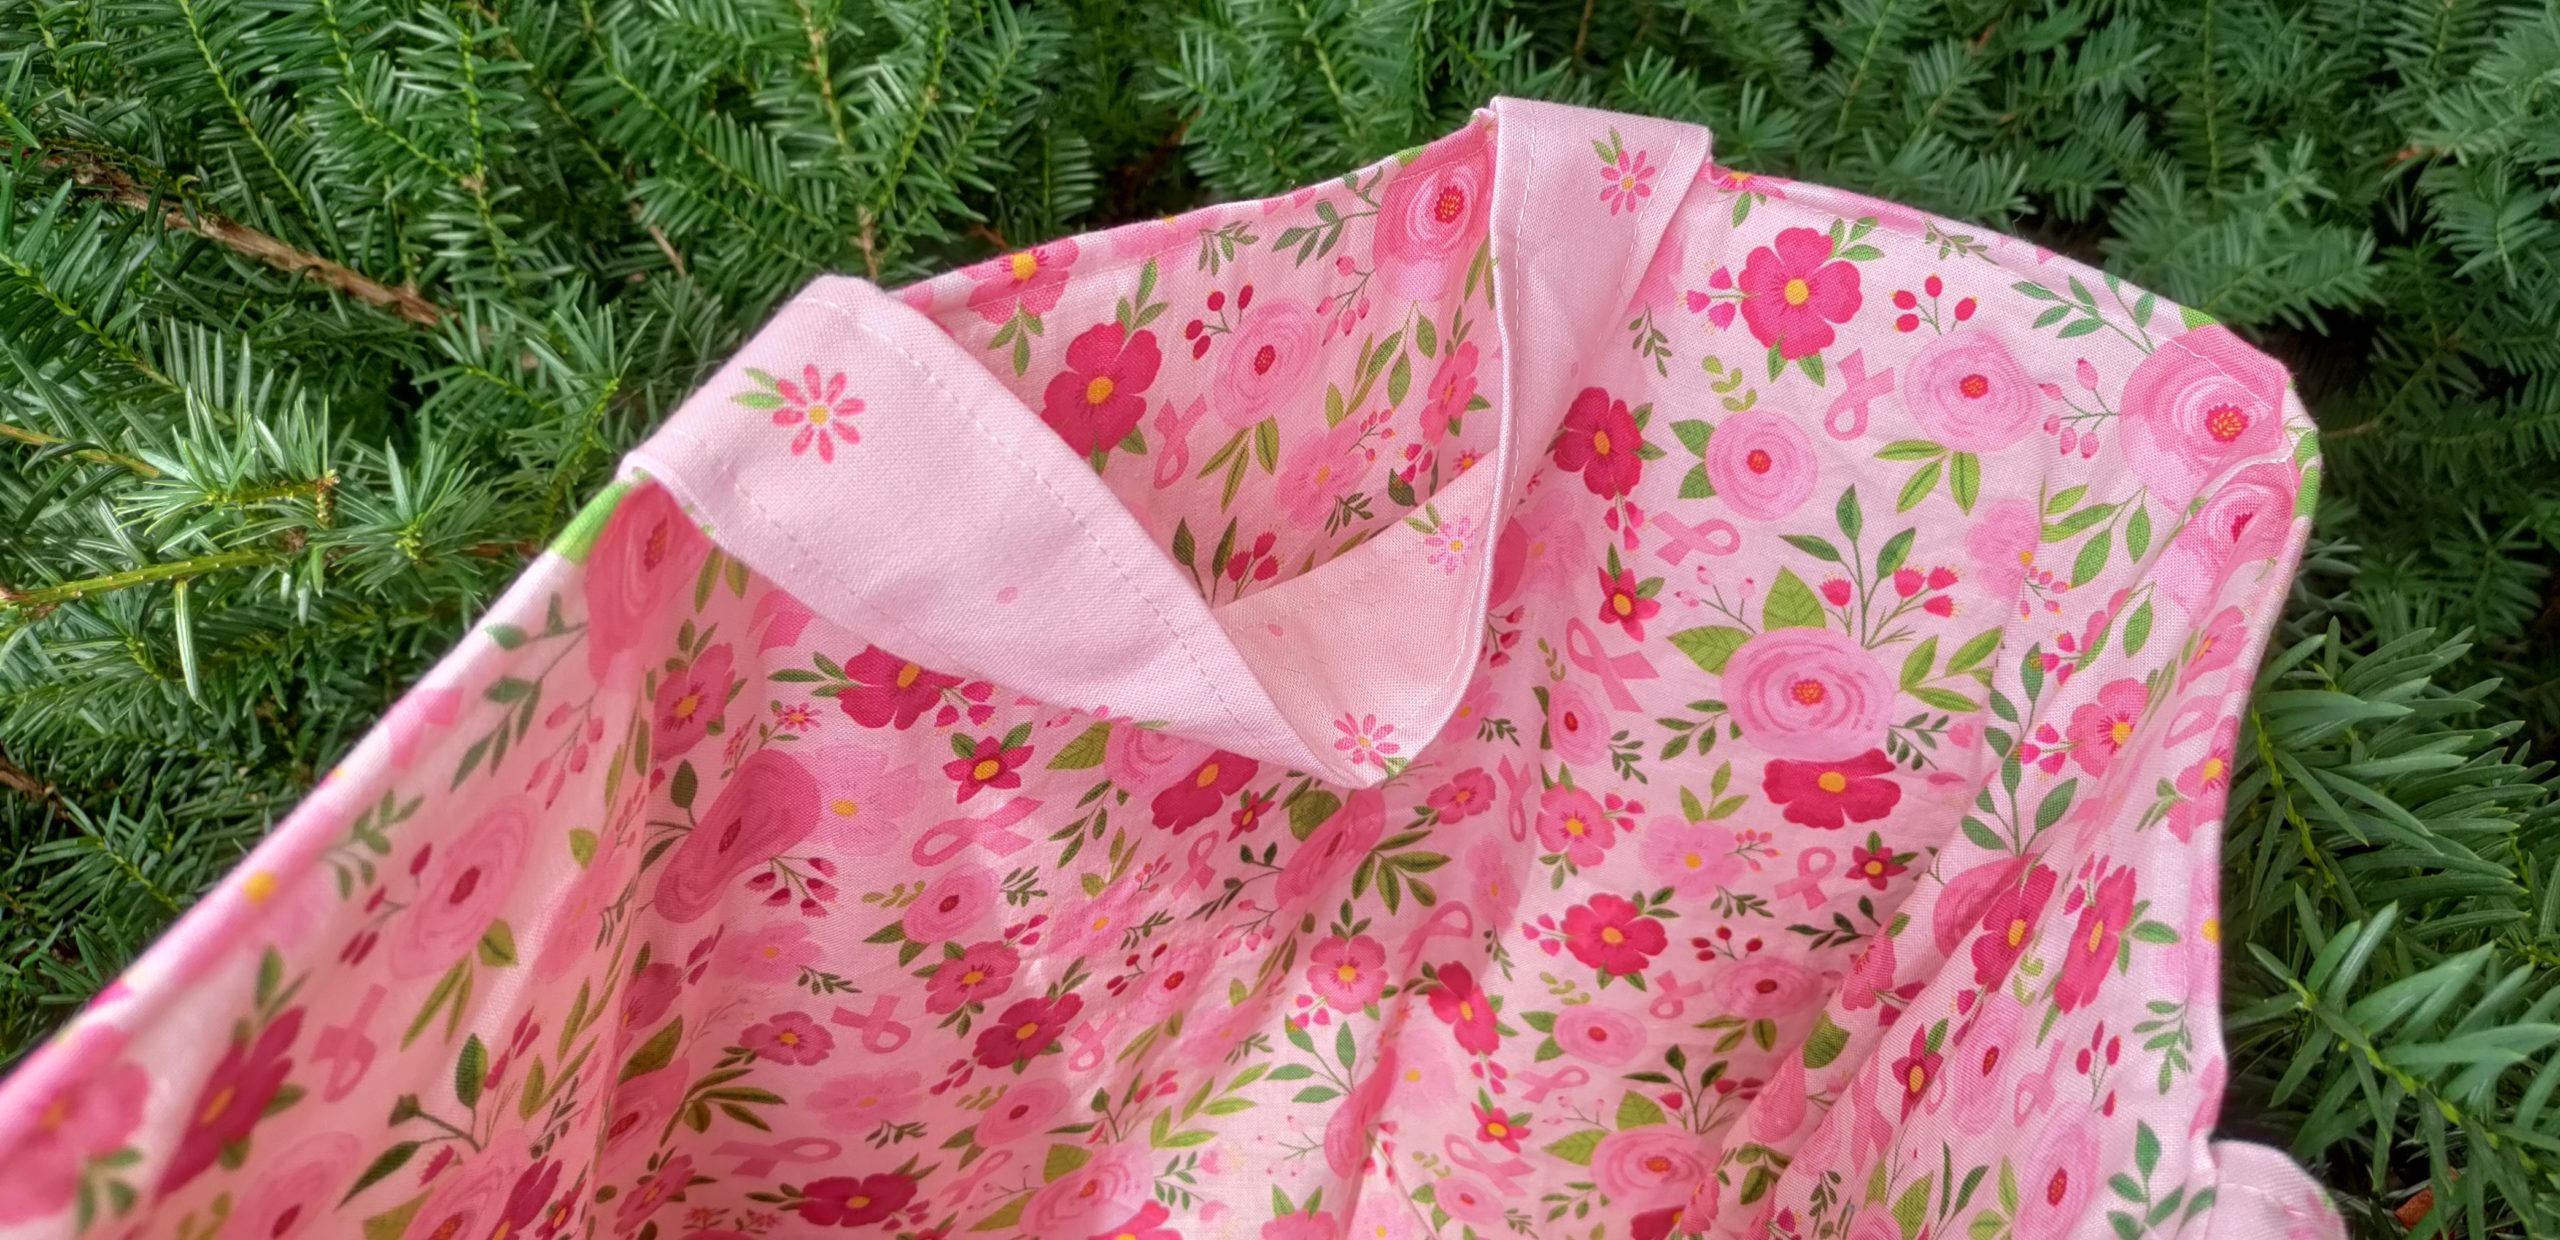 I used the Strength in Pink fabric collection, which features various shades of pink with butterflies, flowers, and breast cancer ribbons, to make a tote bag with several pockets on the outside.